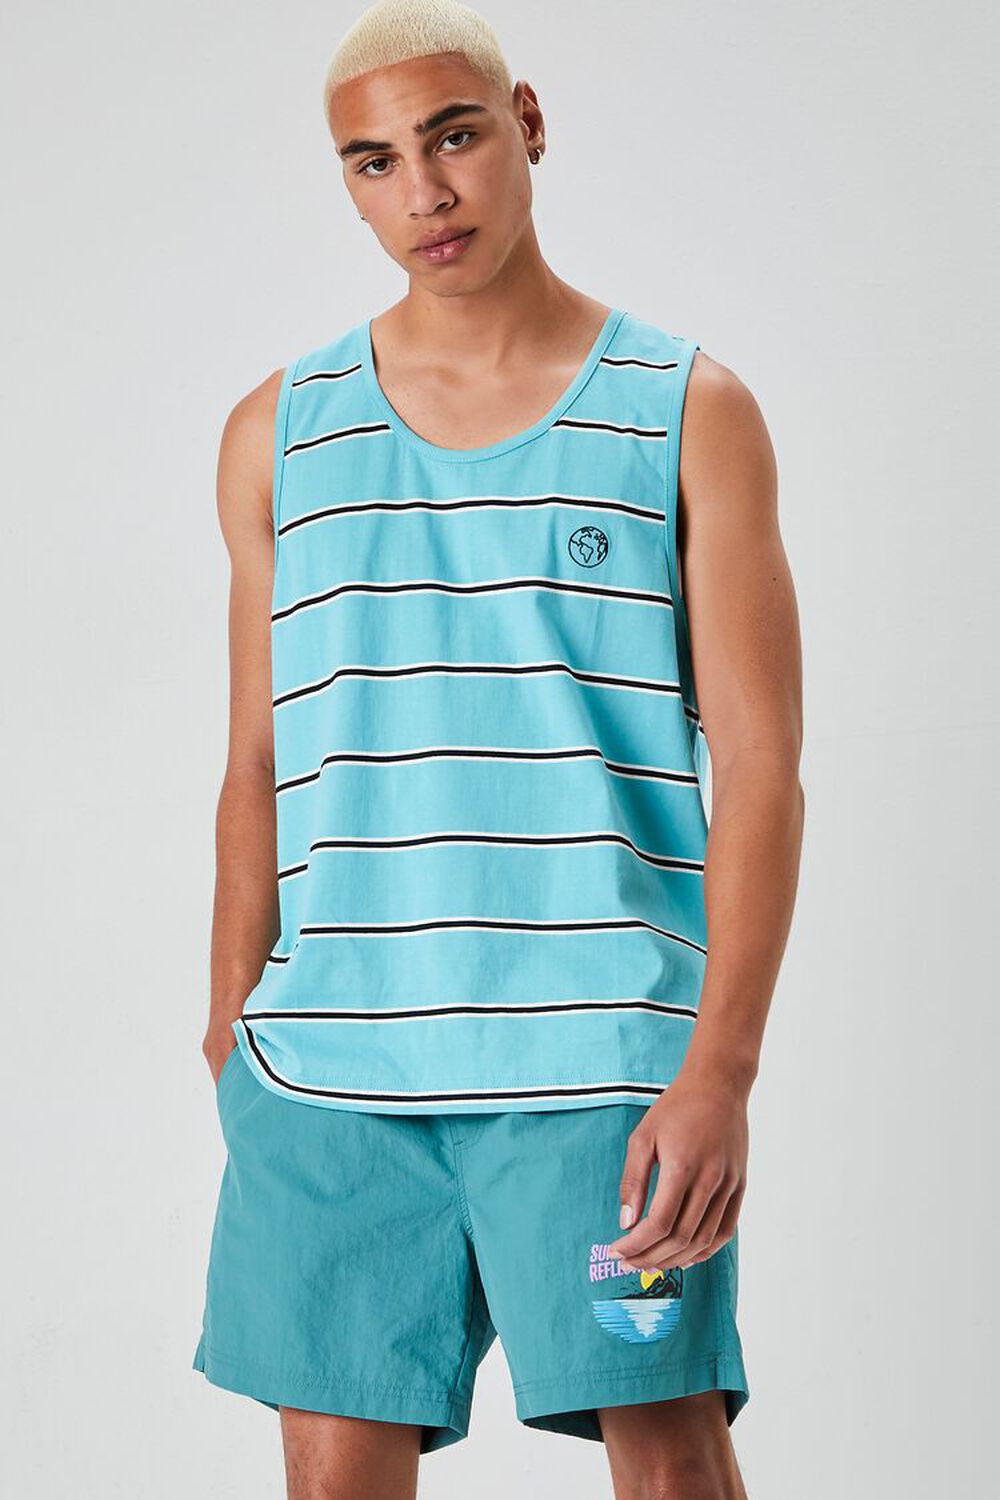 TEAL/MULTI Embroidered Earth Striped Tank Top, image 1